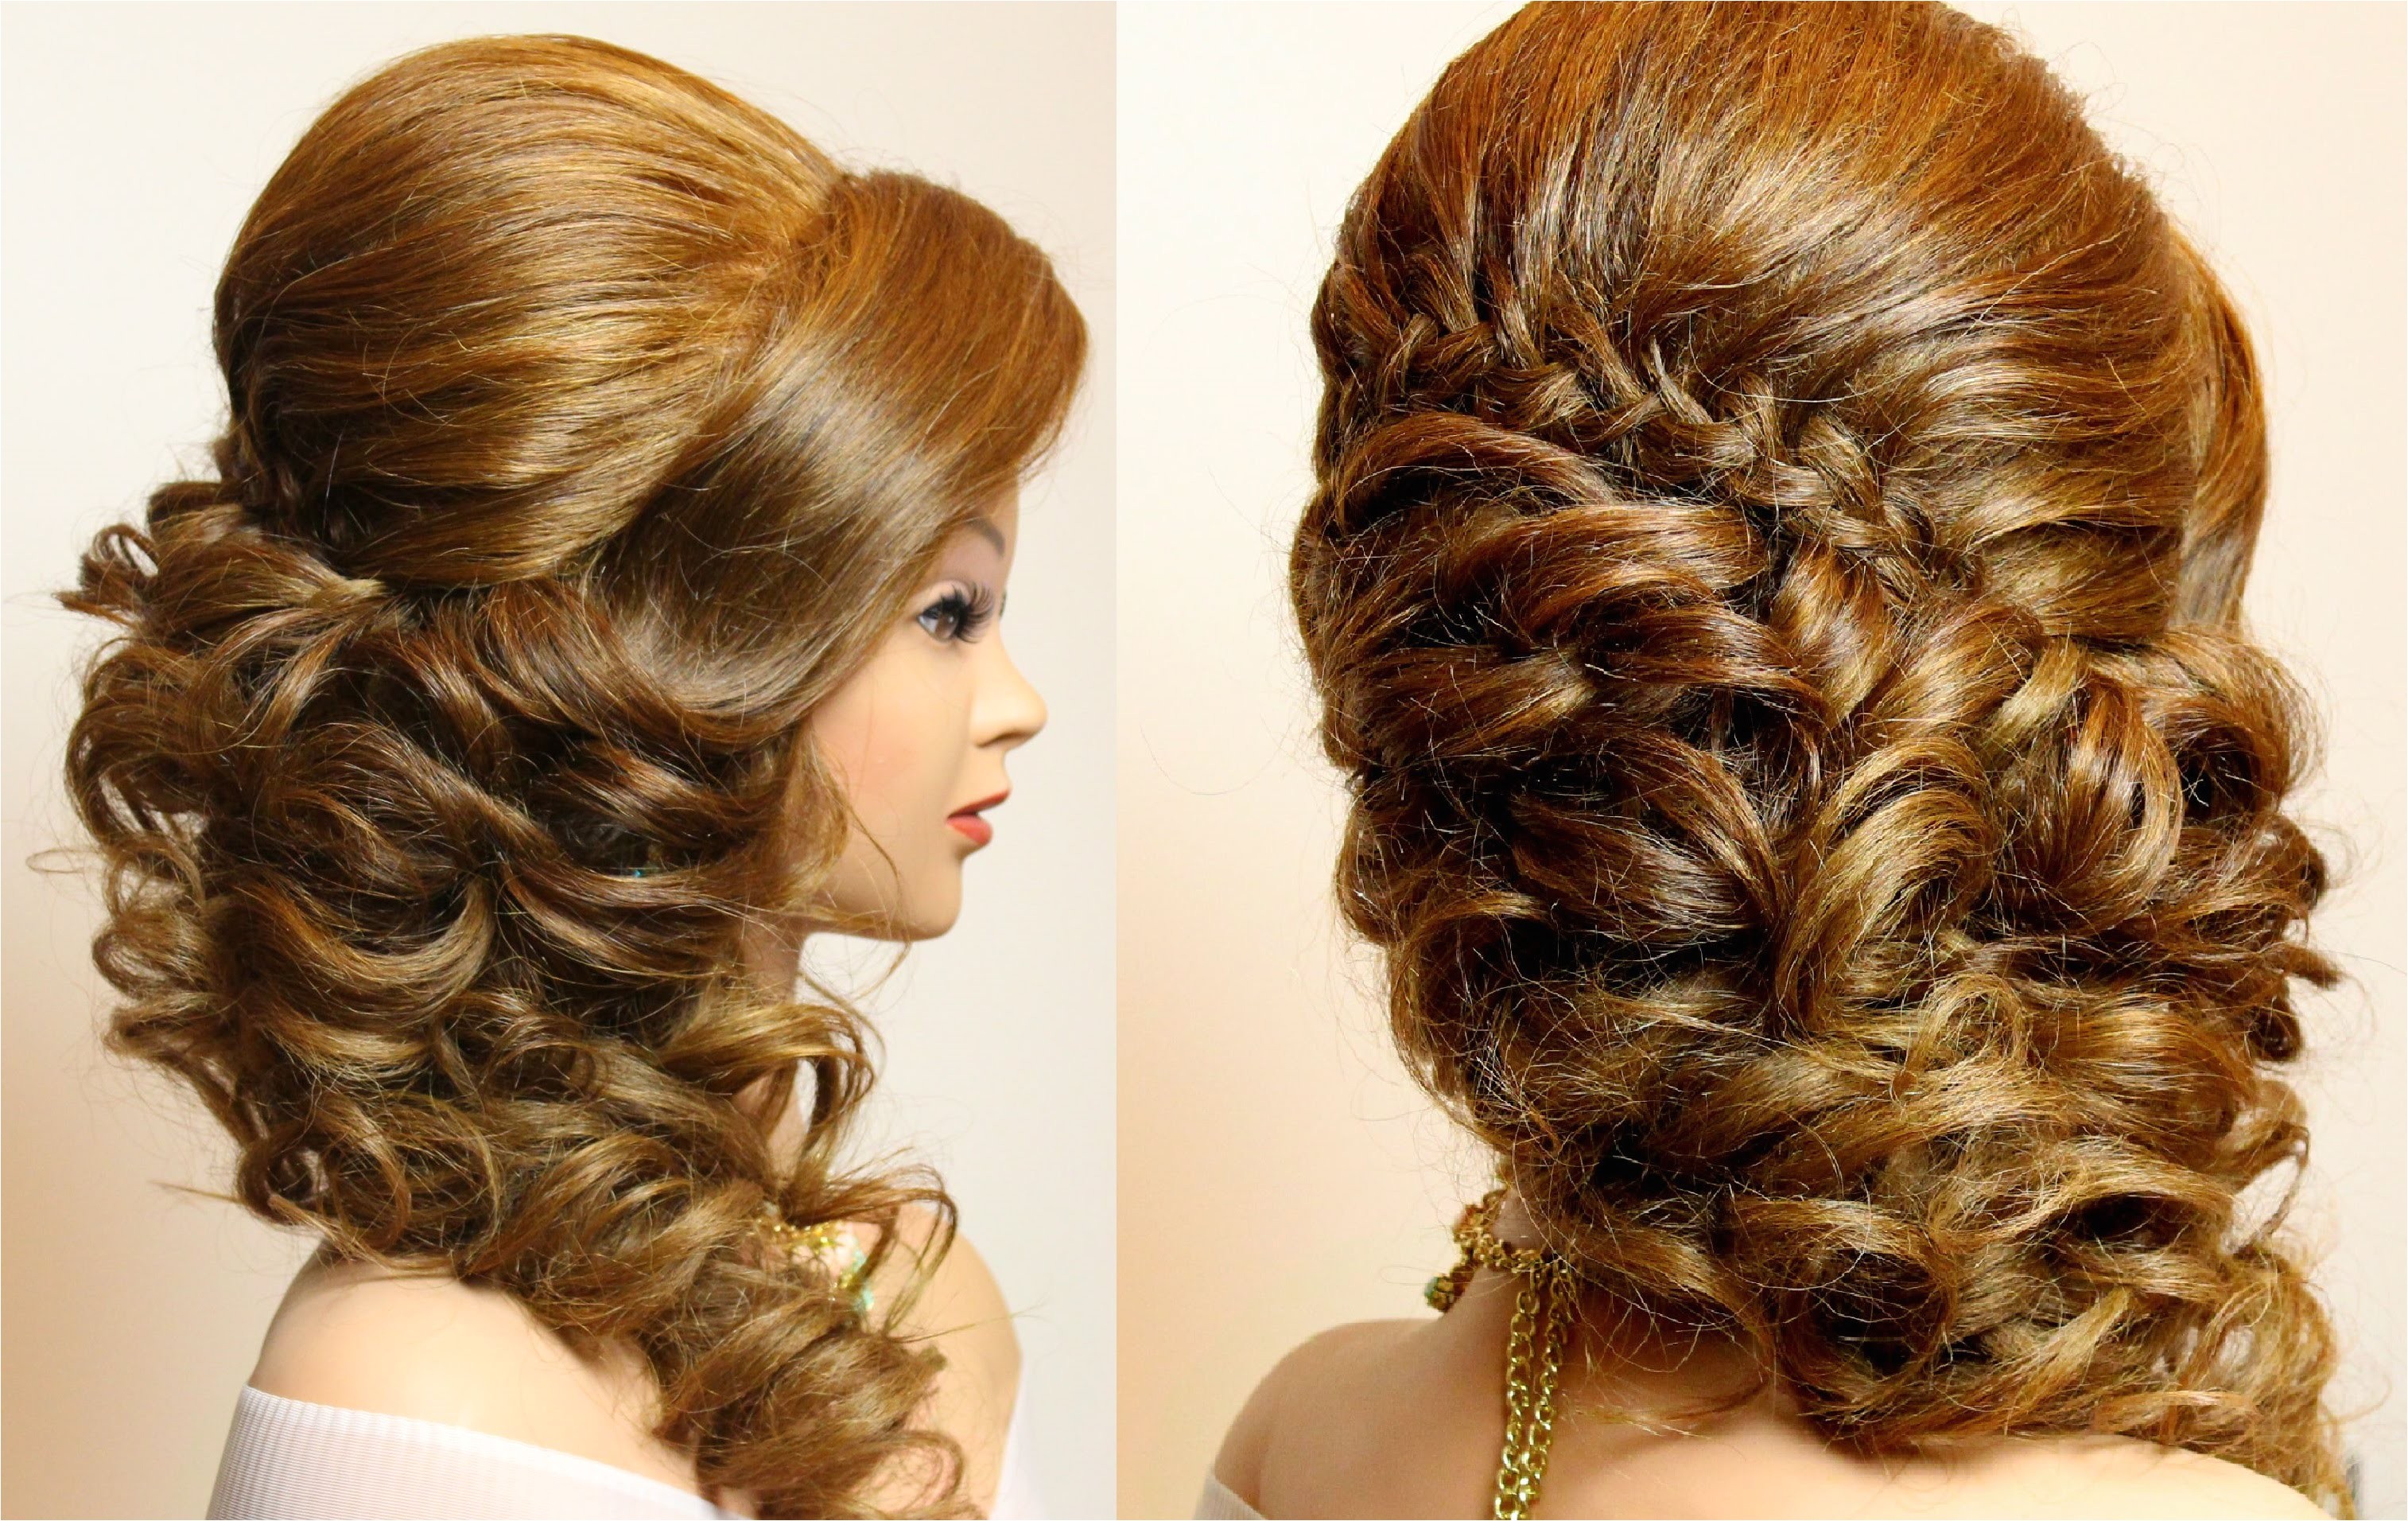 curly prom wedding hairstyle with braid for long hair tutorial